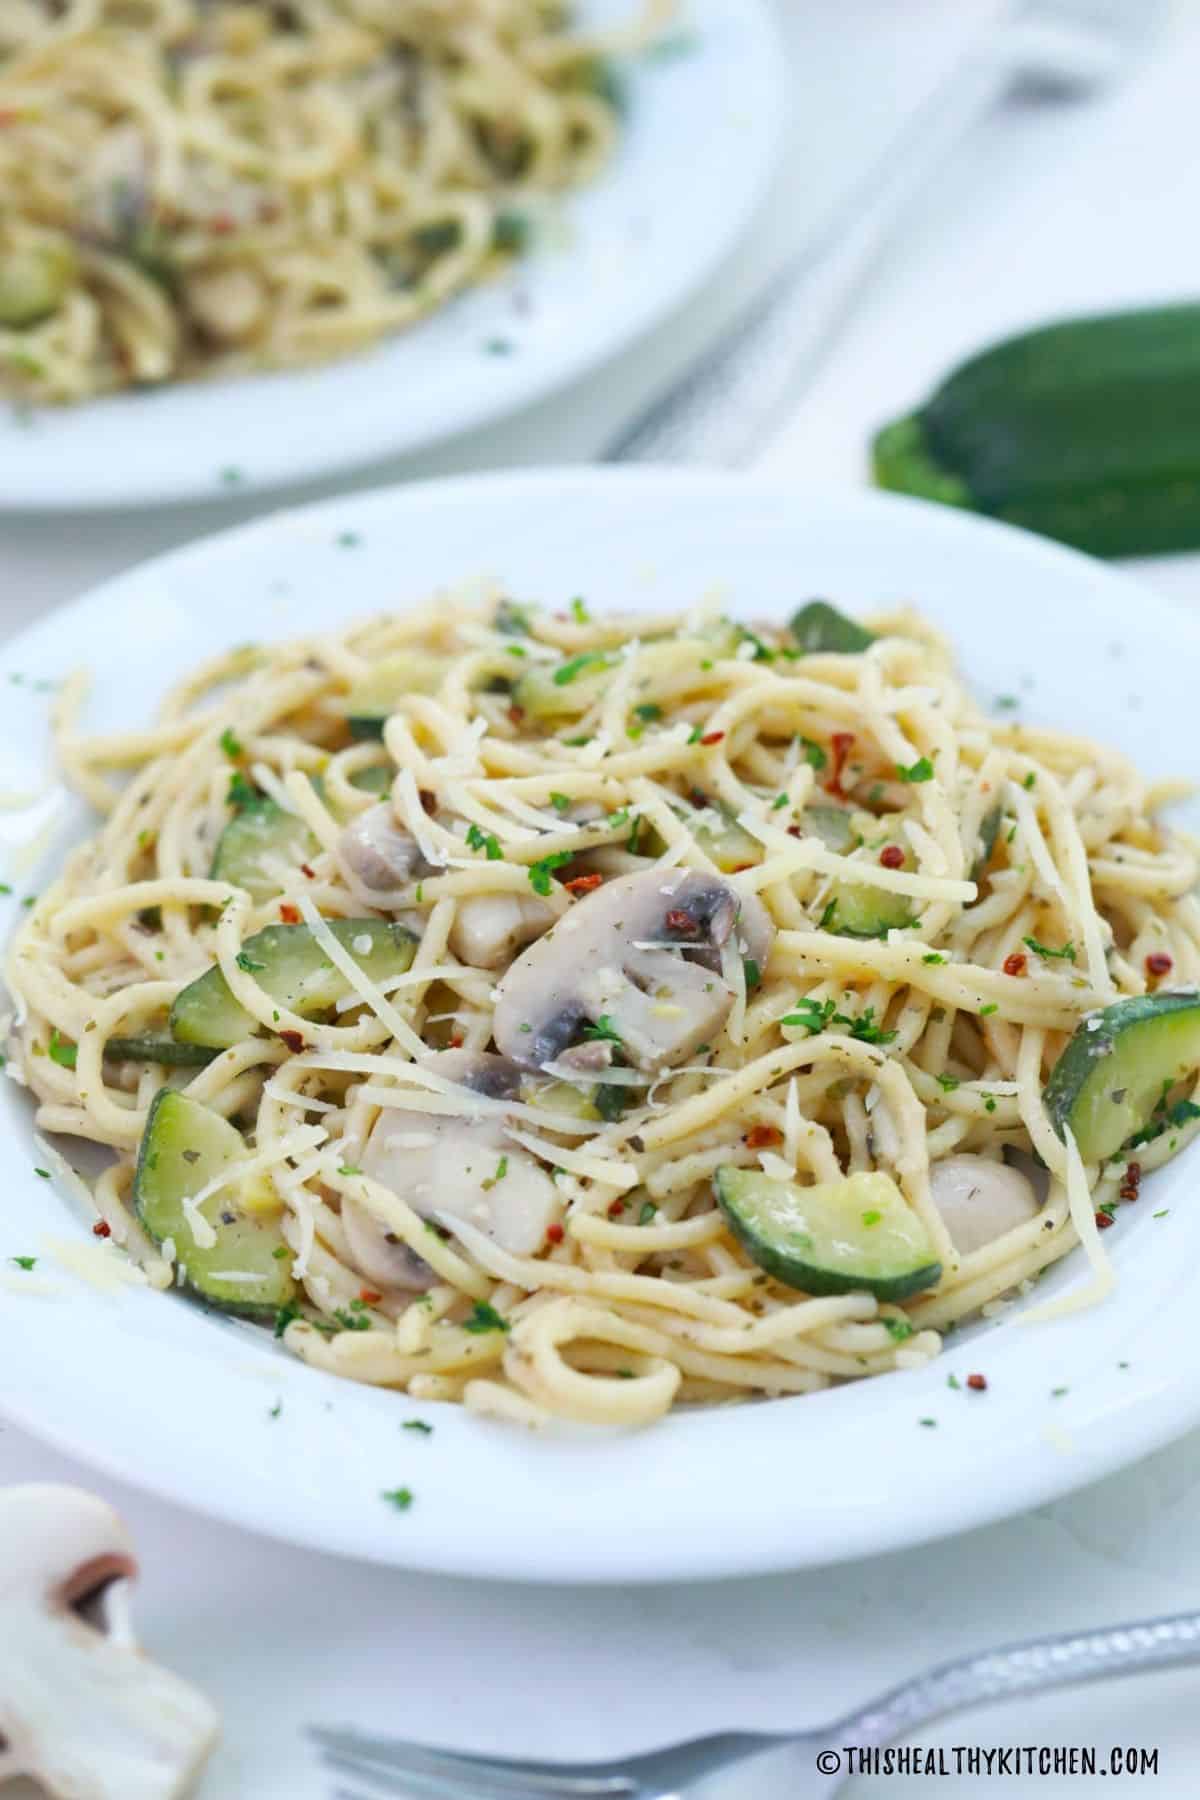 Side view of plate of spaghetti with mushrooms and zucchini on top.